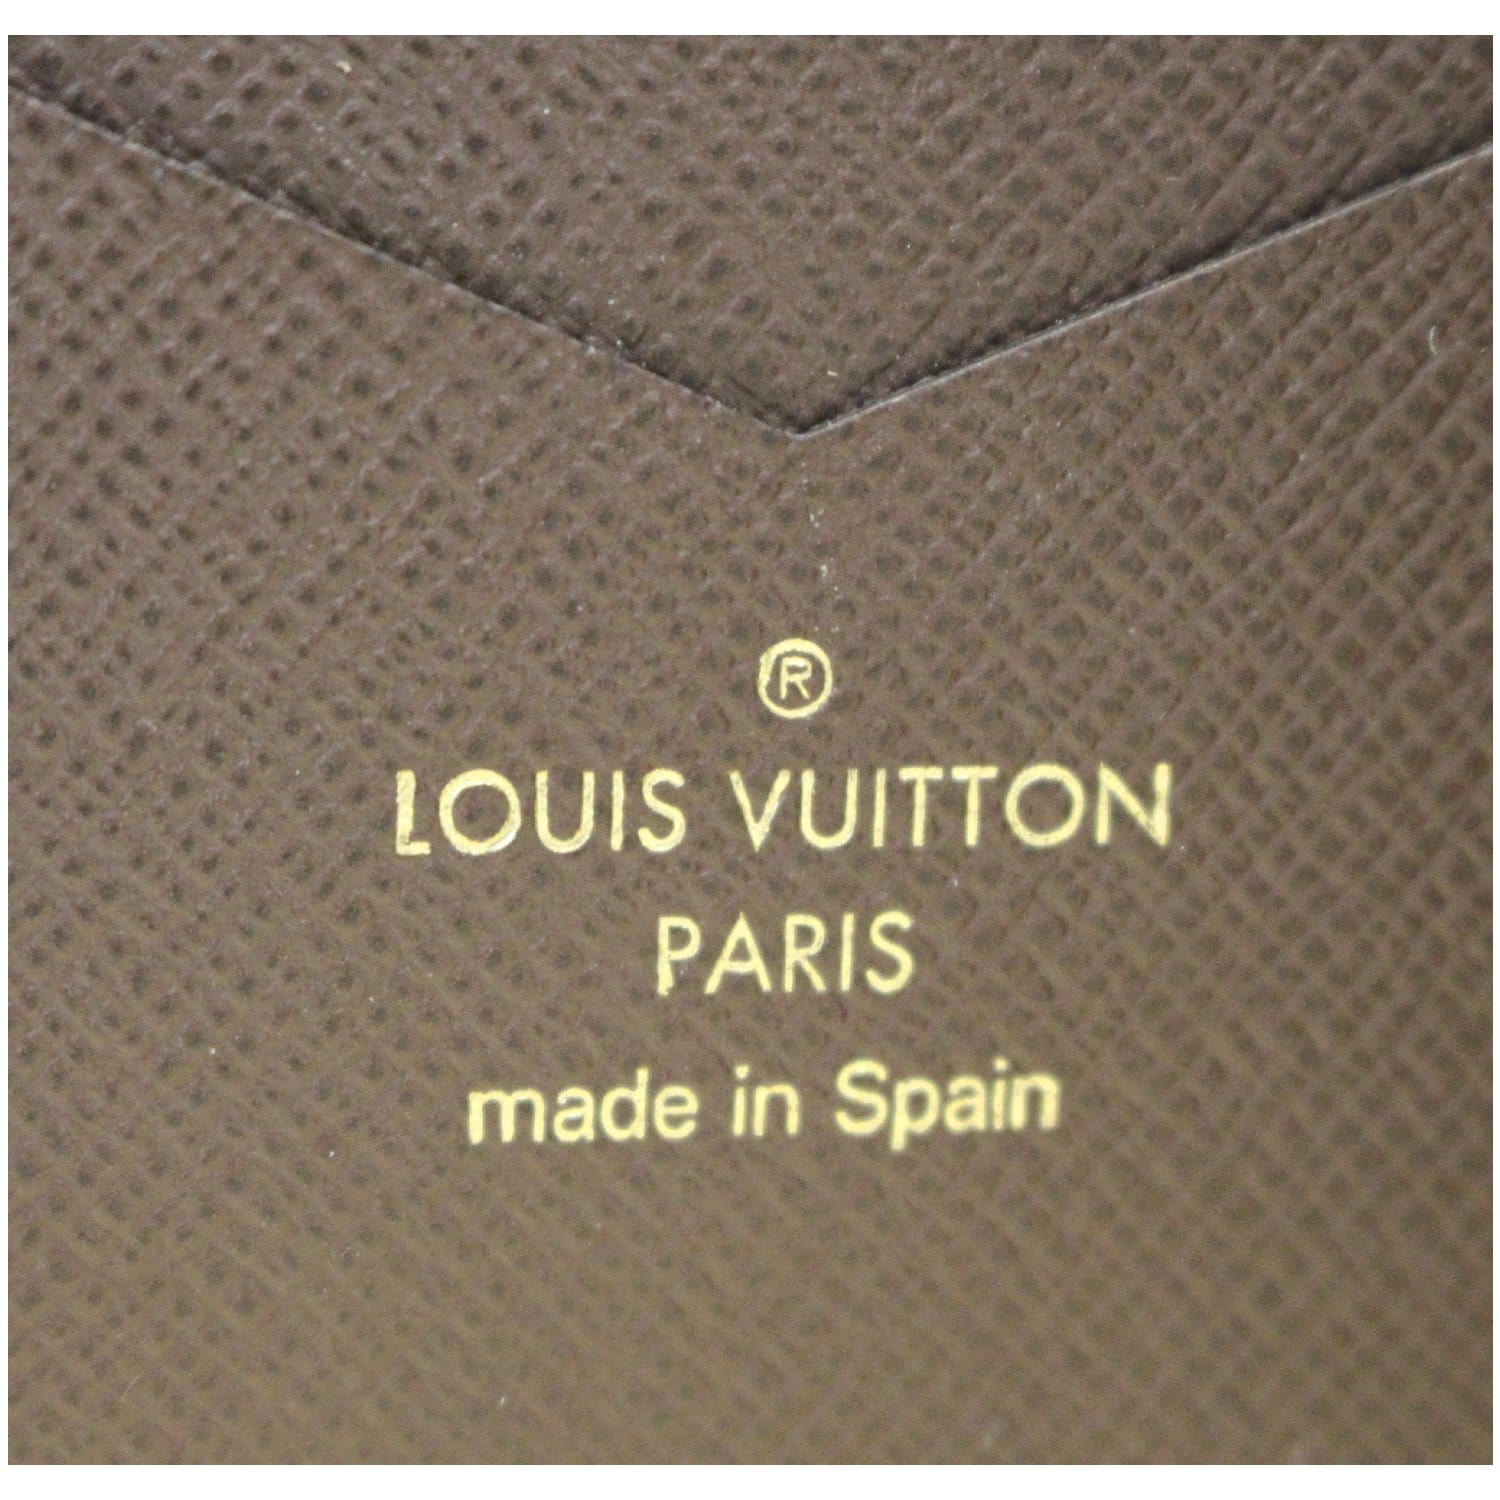 AUTH Louis Vuitton Monogram iPhone X or Xs phone case cover & Card holder! !